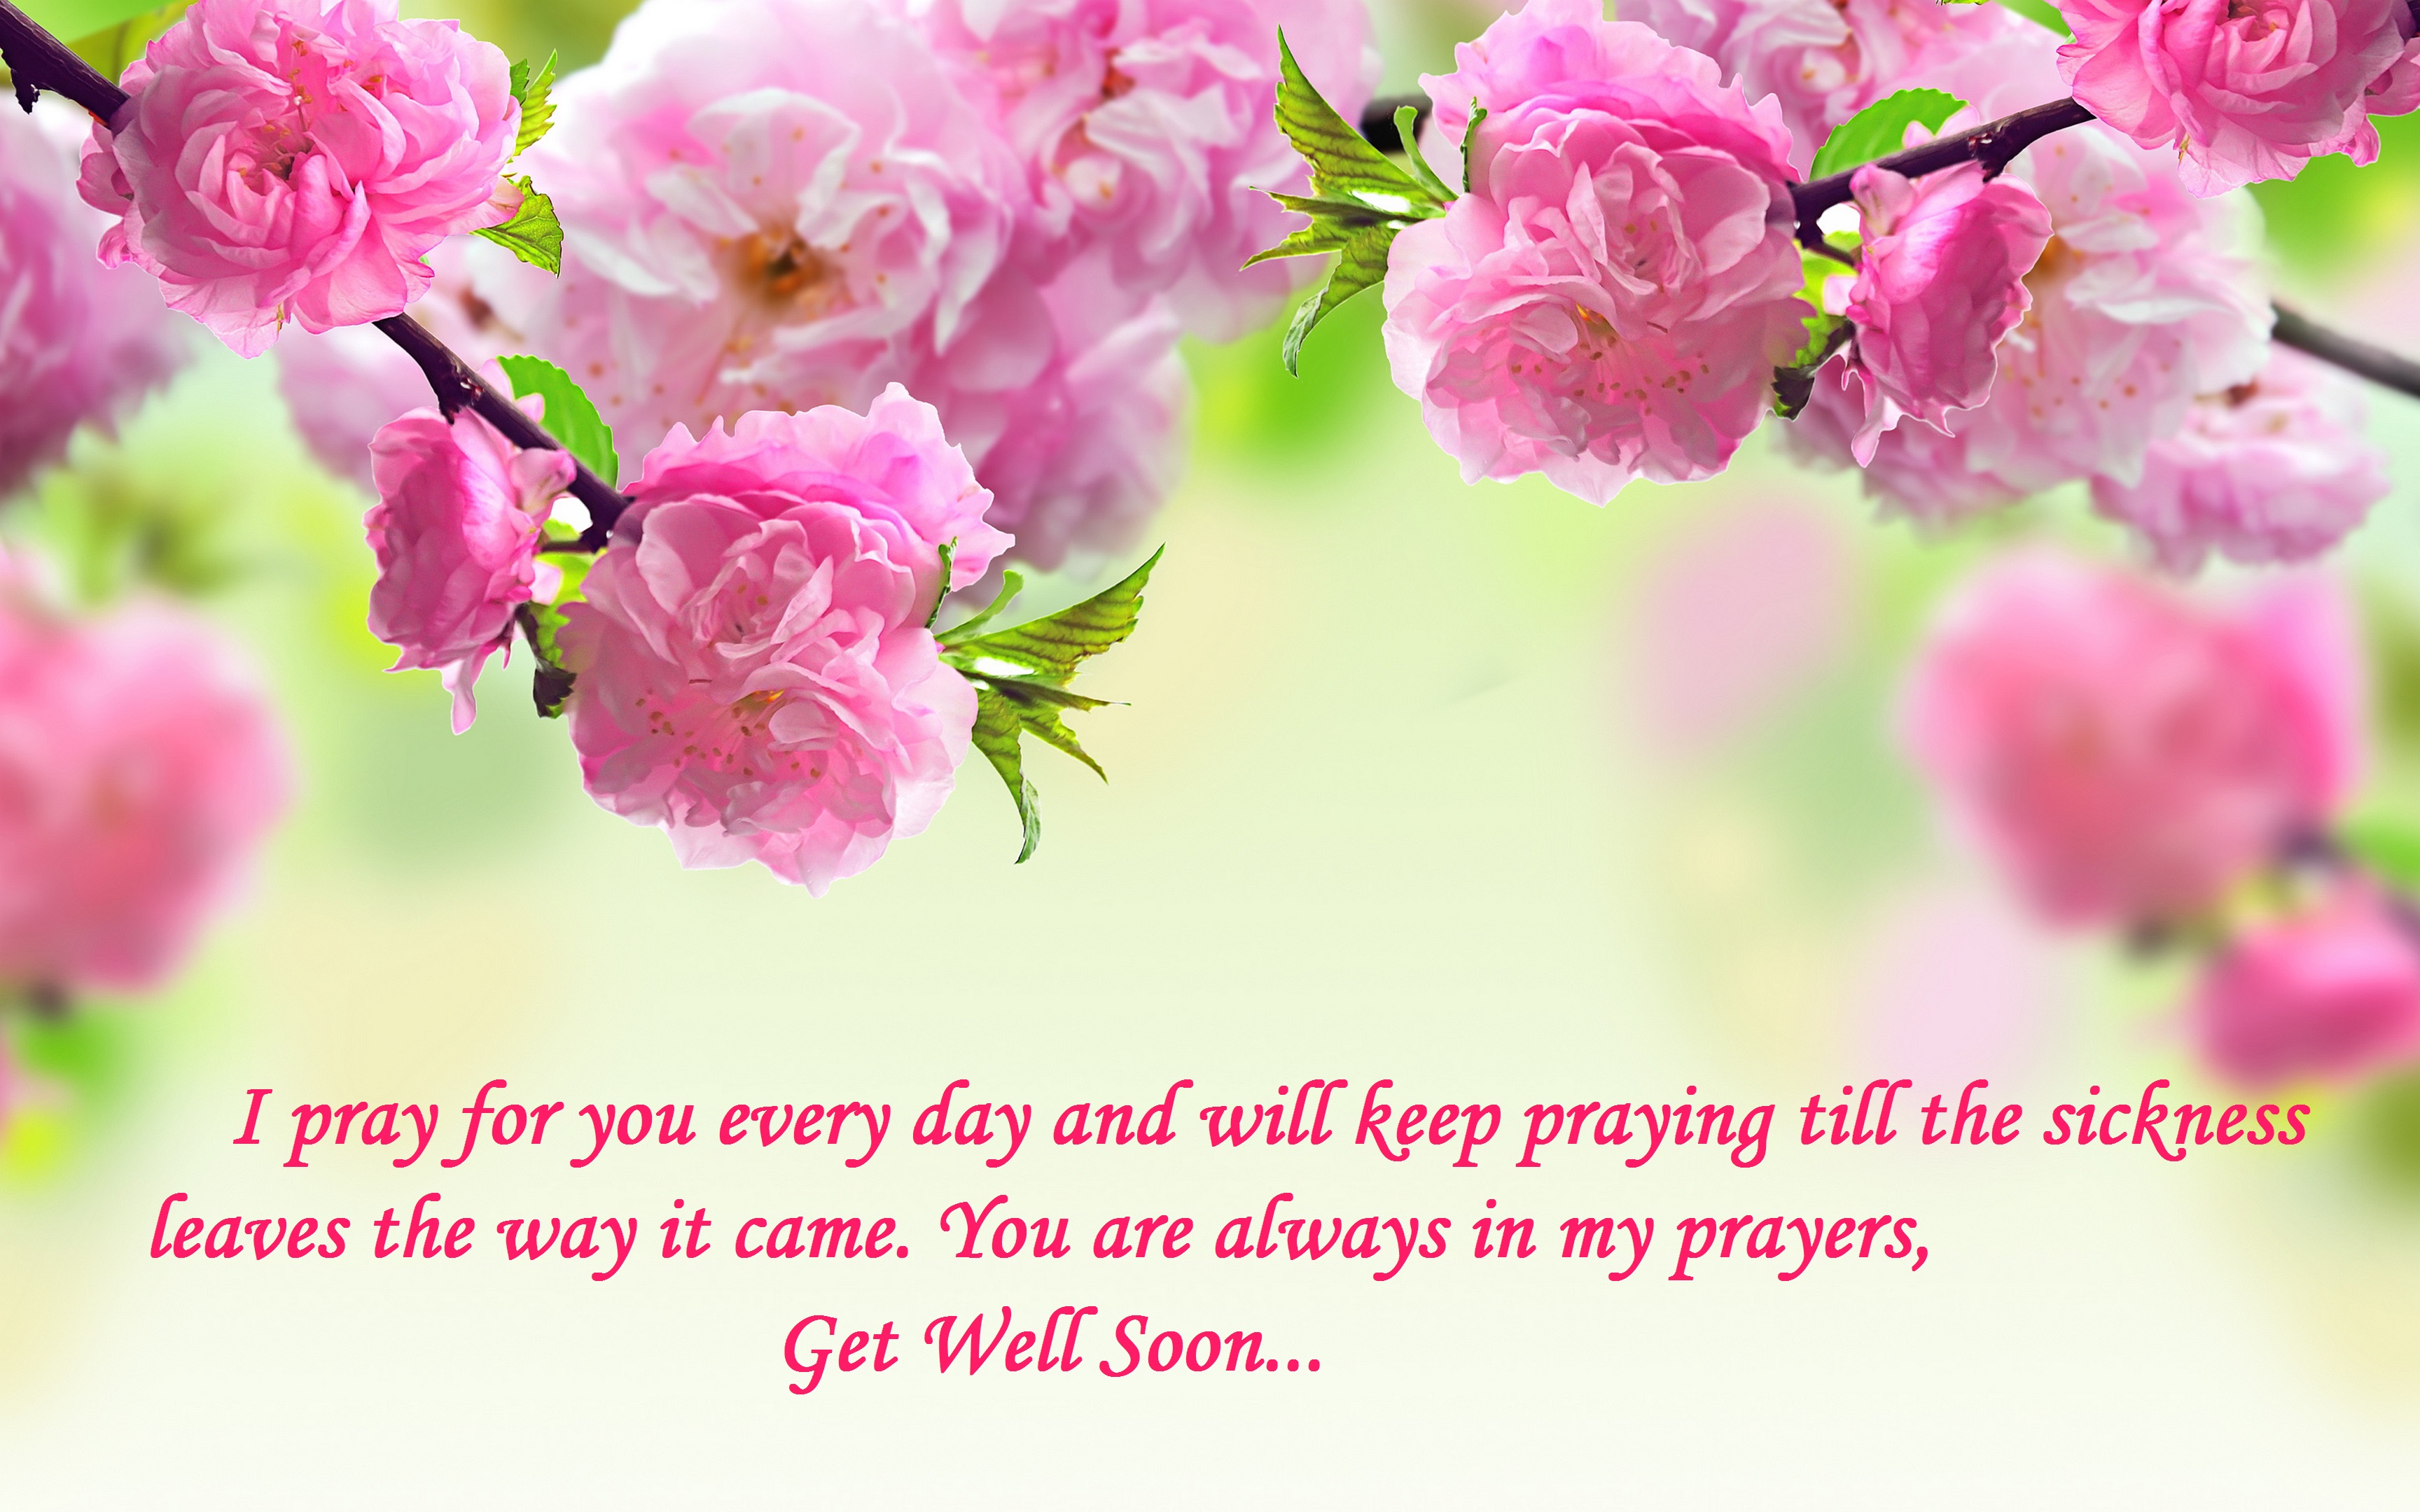 get well wishes hd image